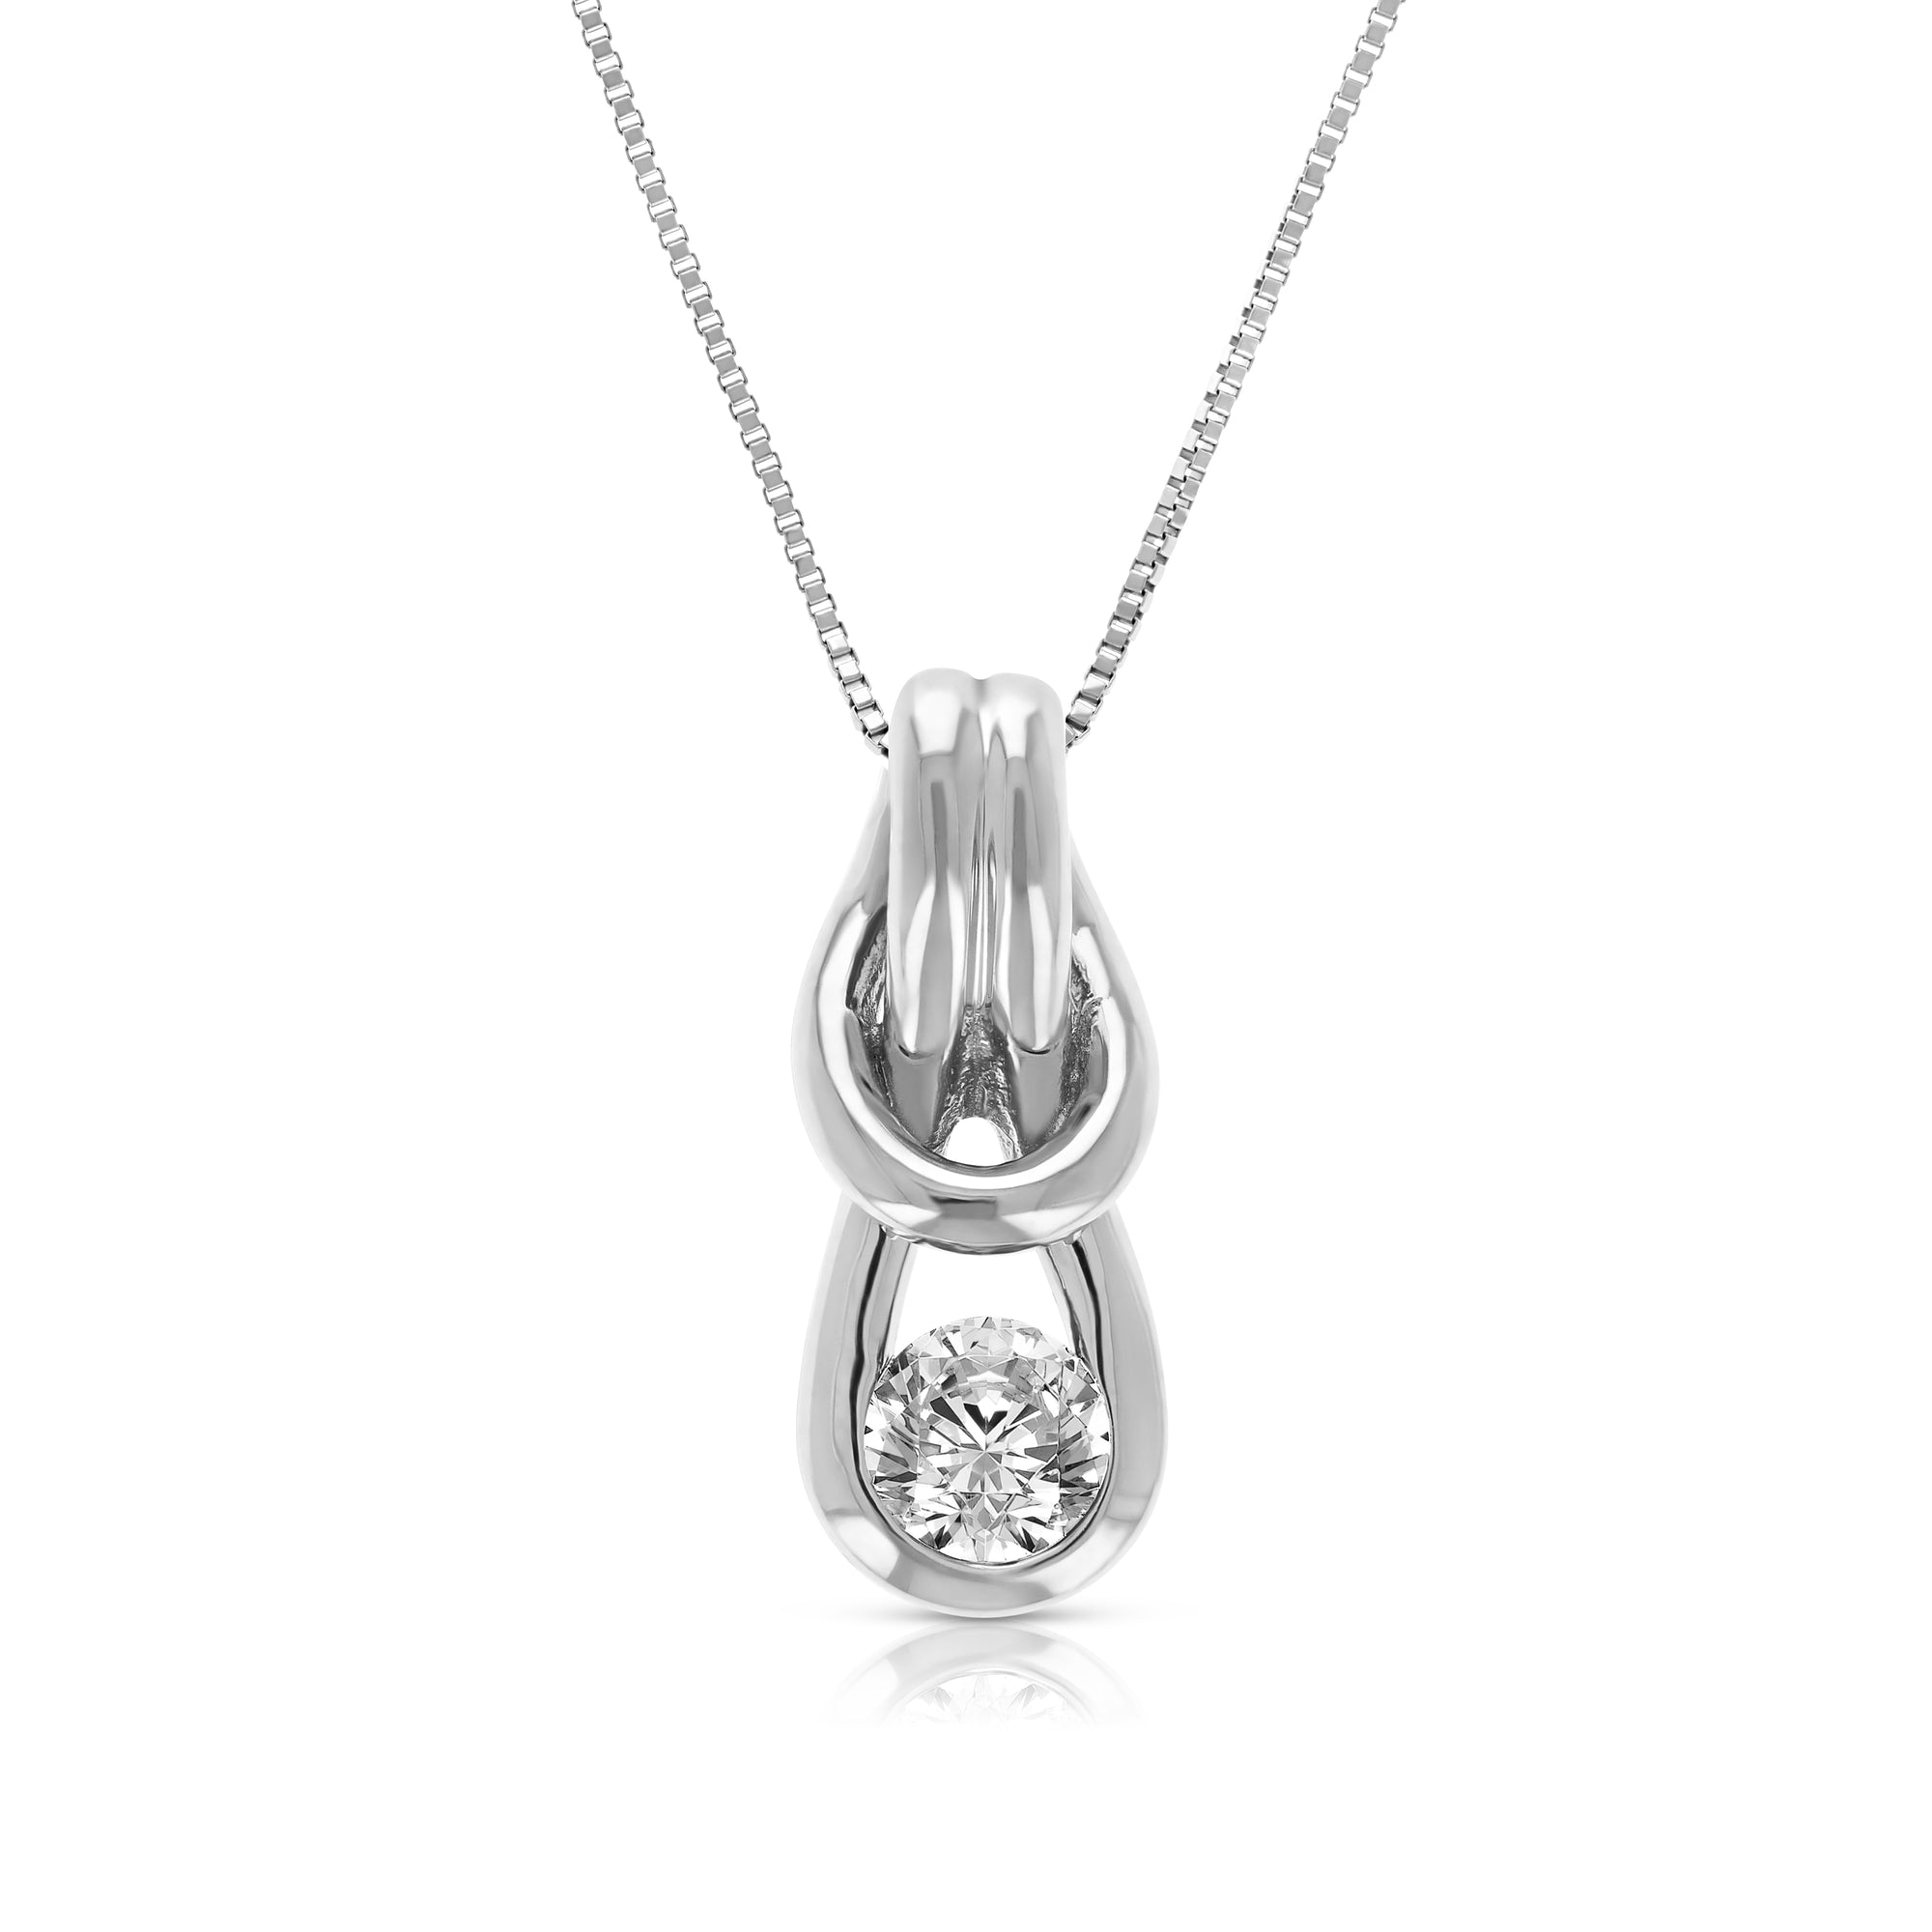 1/4 cttw Diamond Solitaire Knot Pendant Necklace 14K White Gold 18 Inch Chain